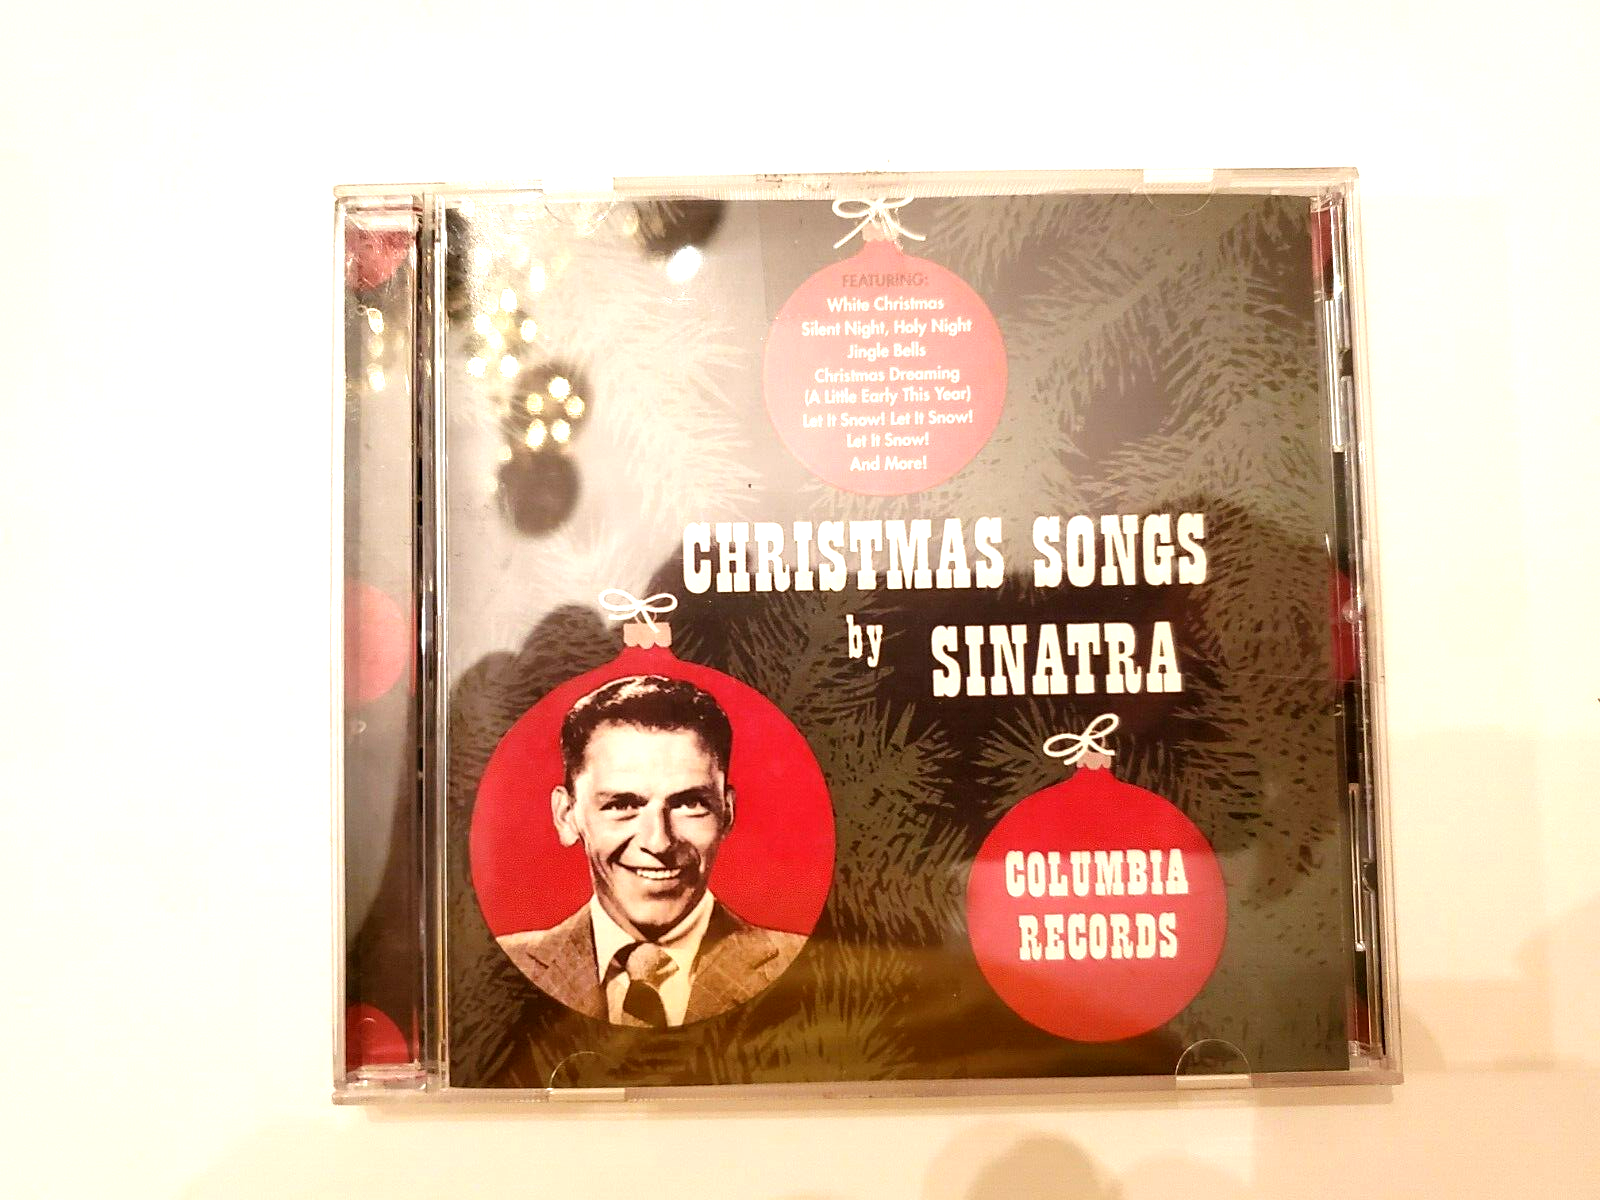 Frank Sinatra: Christmas Songs By Sinatra (CD) -Brand New Sealed, *Cracked Case